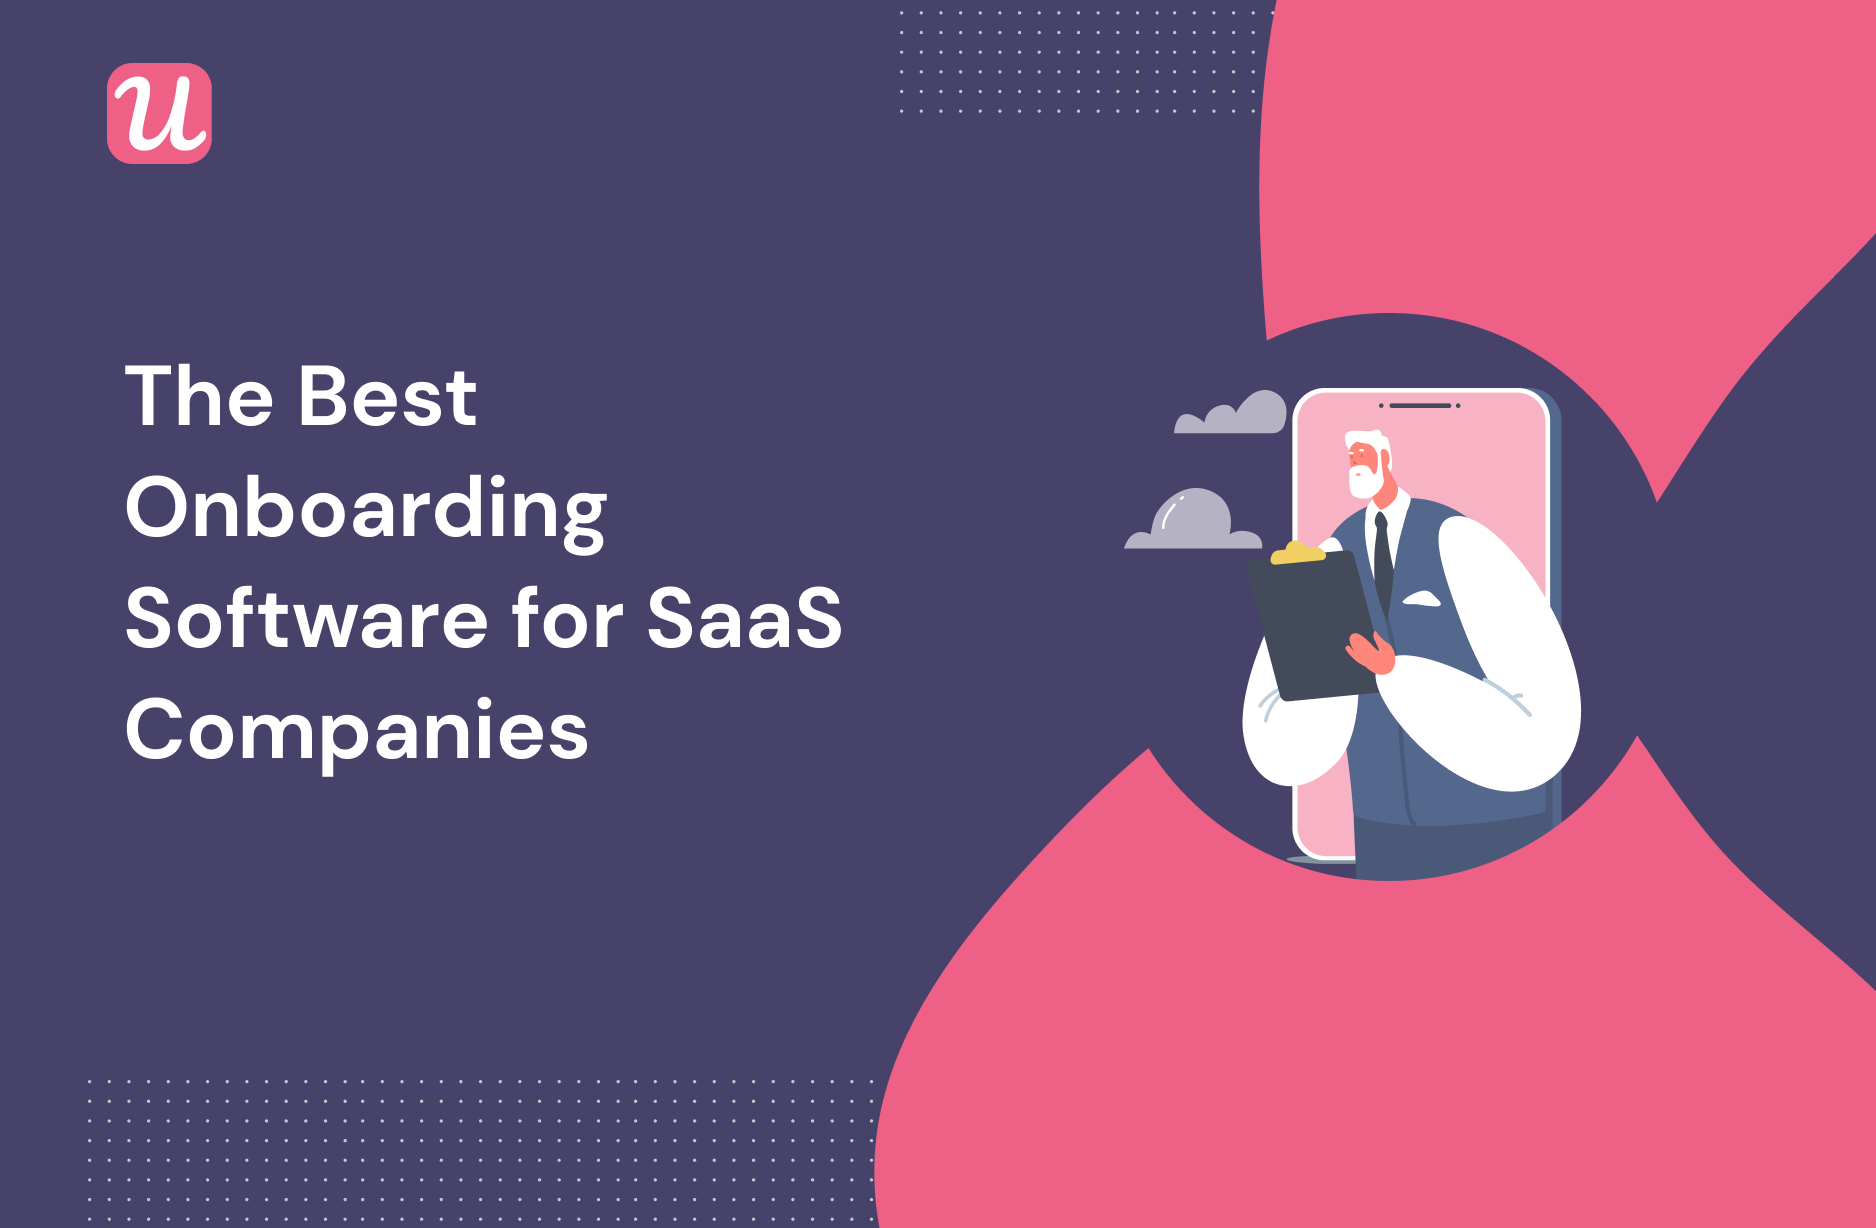 The Best Onboarding Software for SaaS Companies